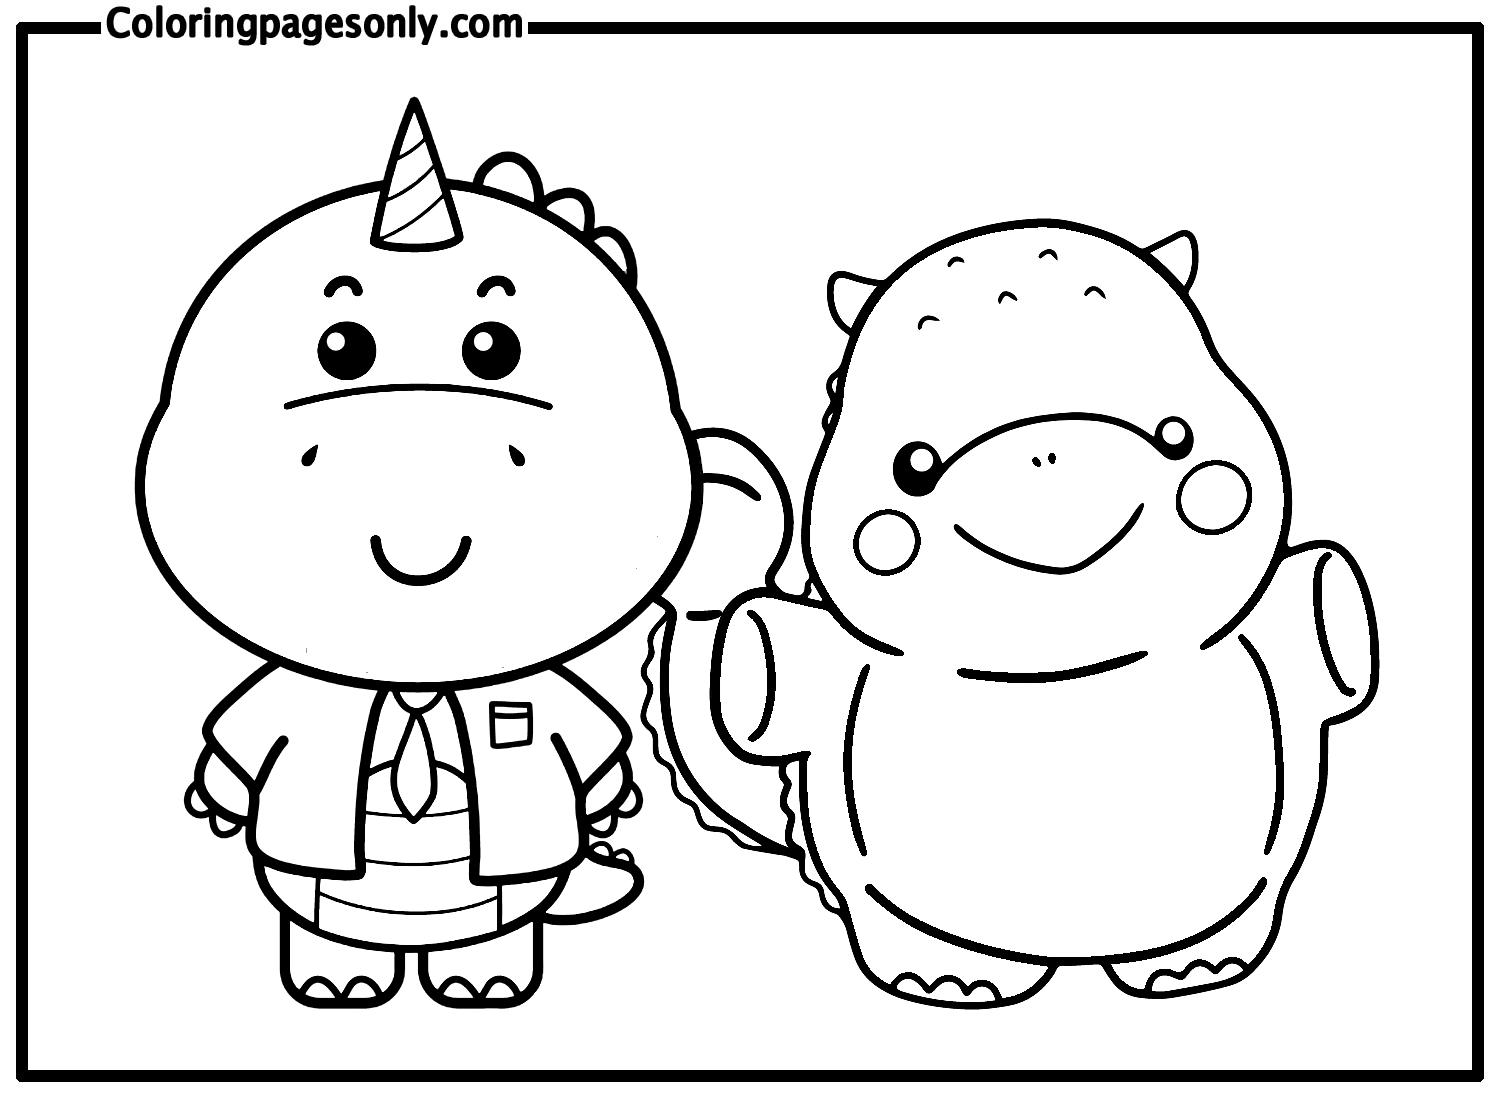 Two Dinosaur Cartoon Coloring Pages